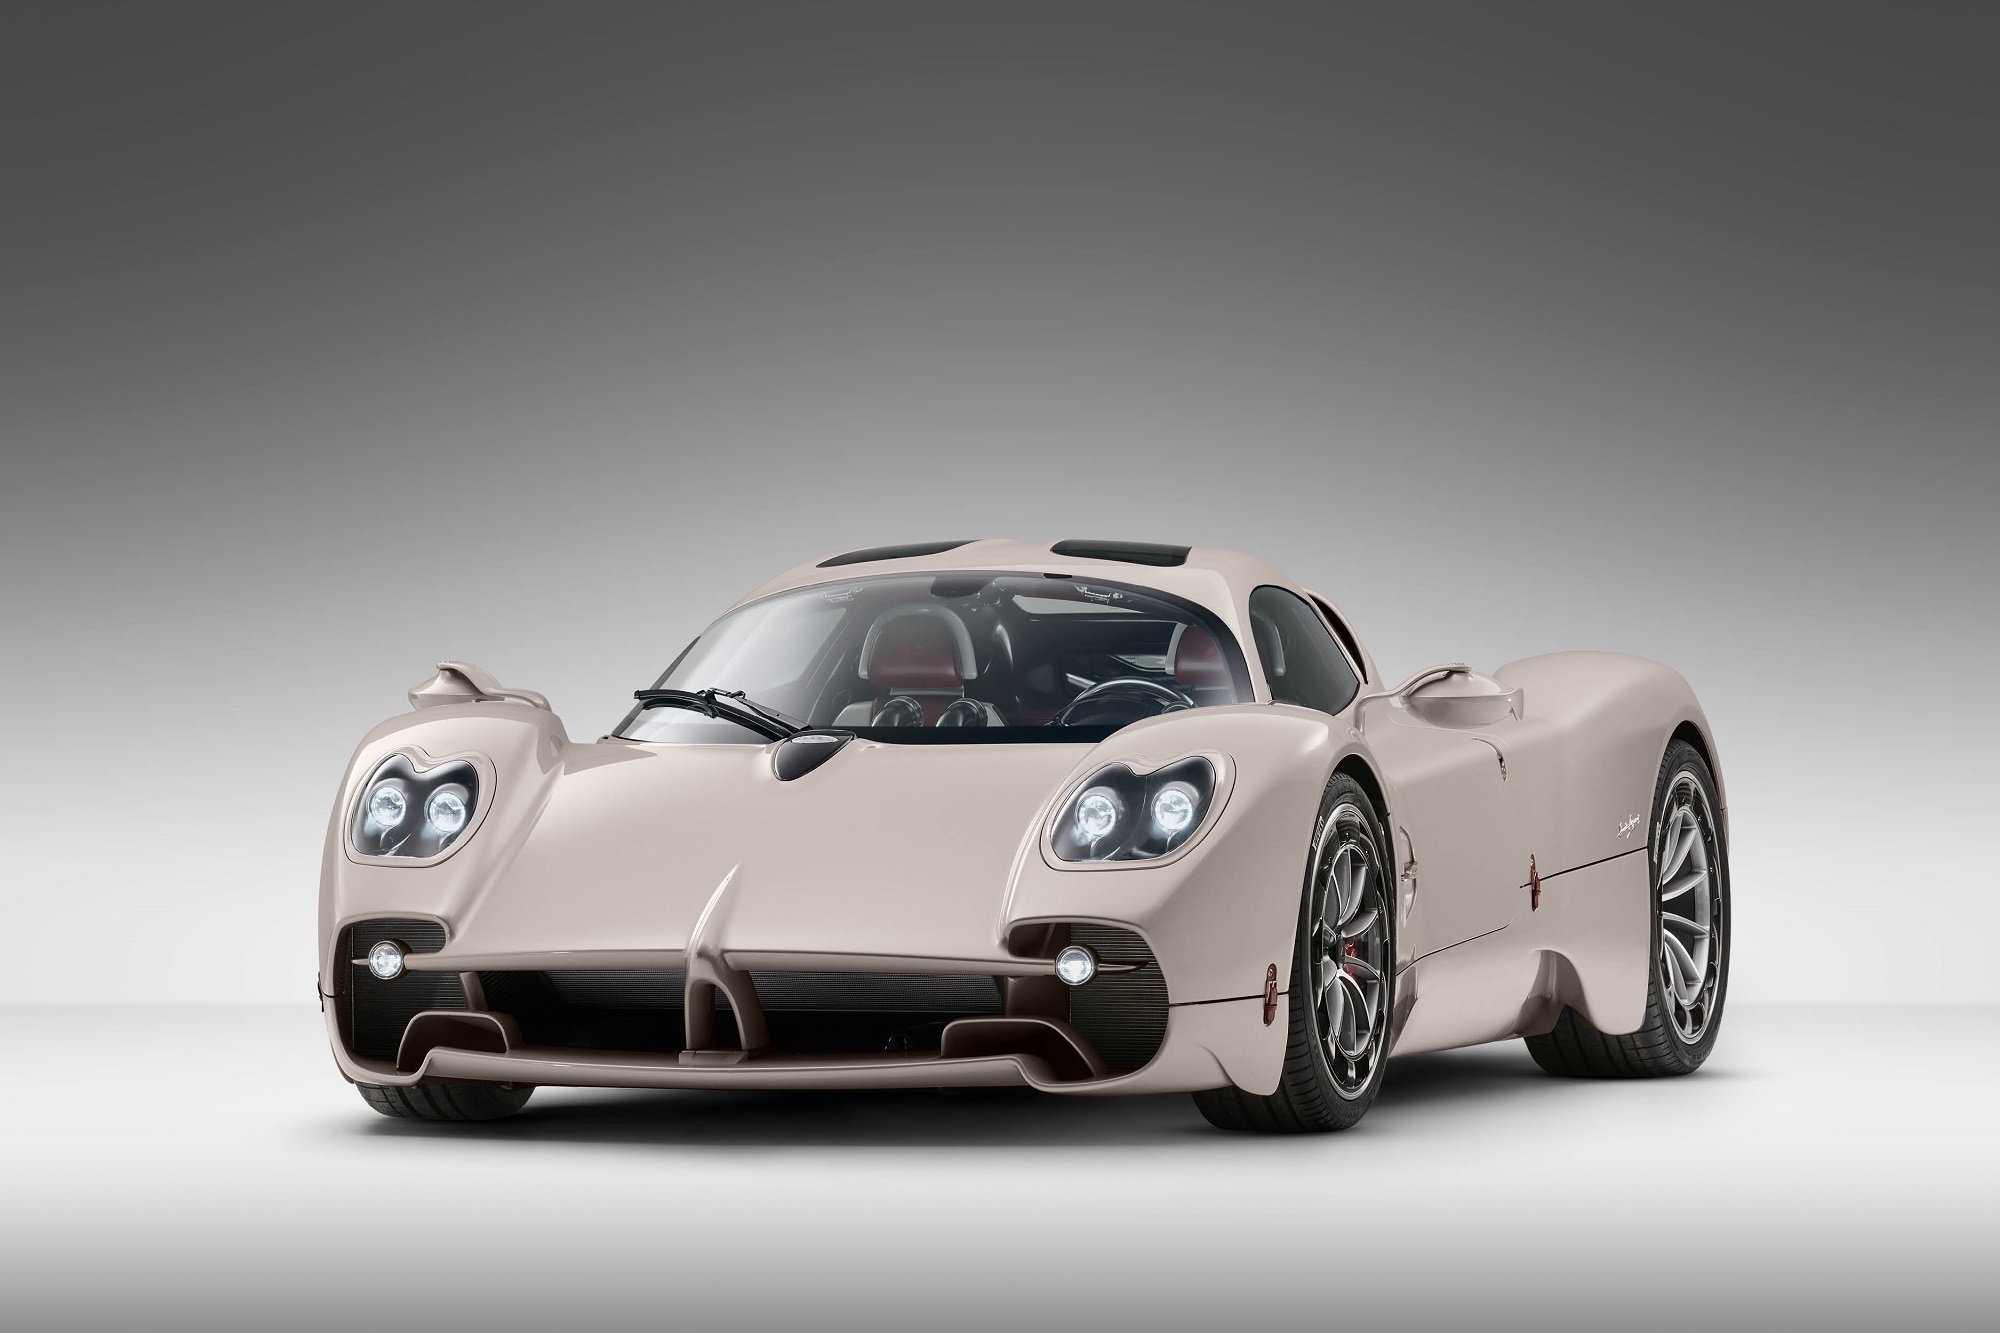 The Pagani Utopia is an elegant latest addition to Pagani's hypercar offerings.